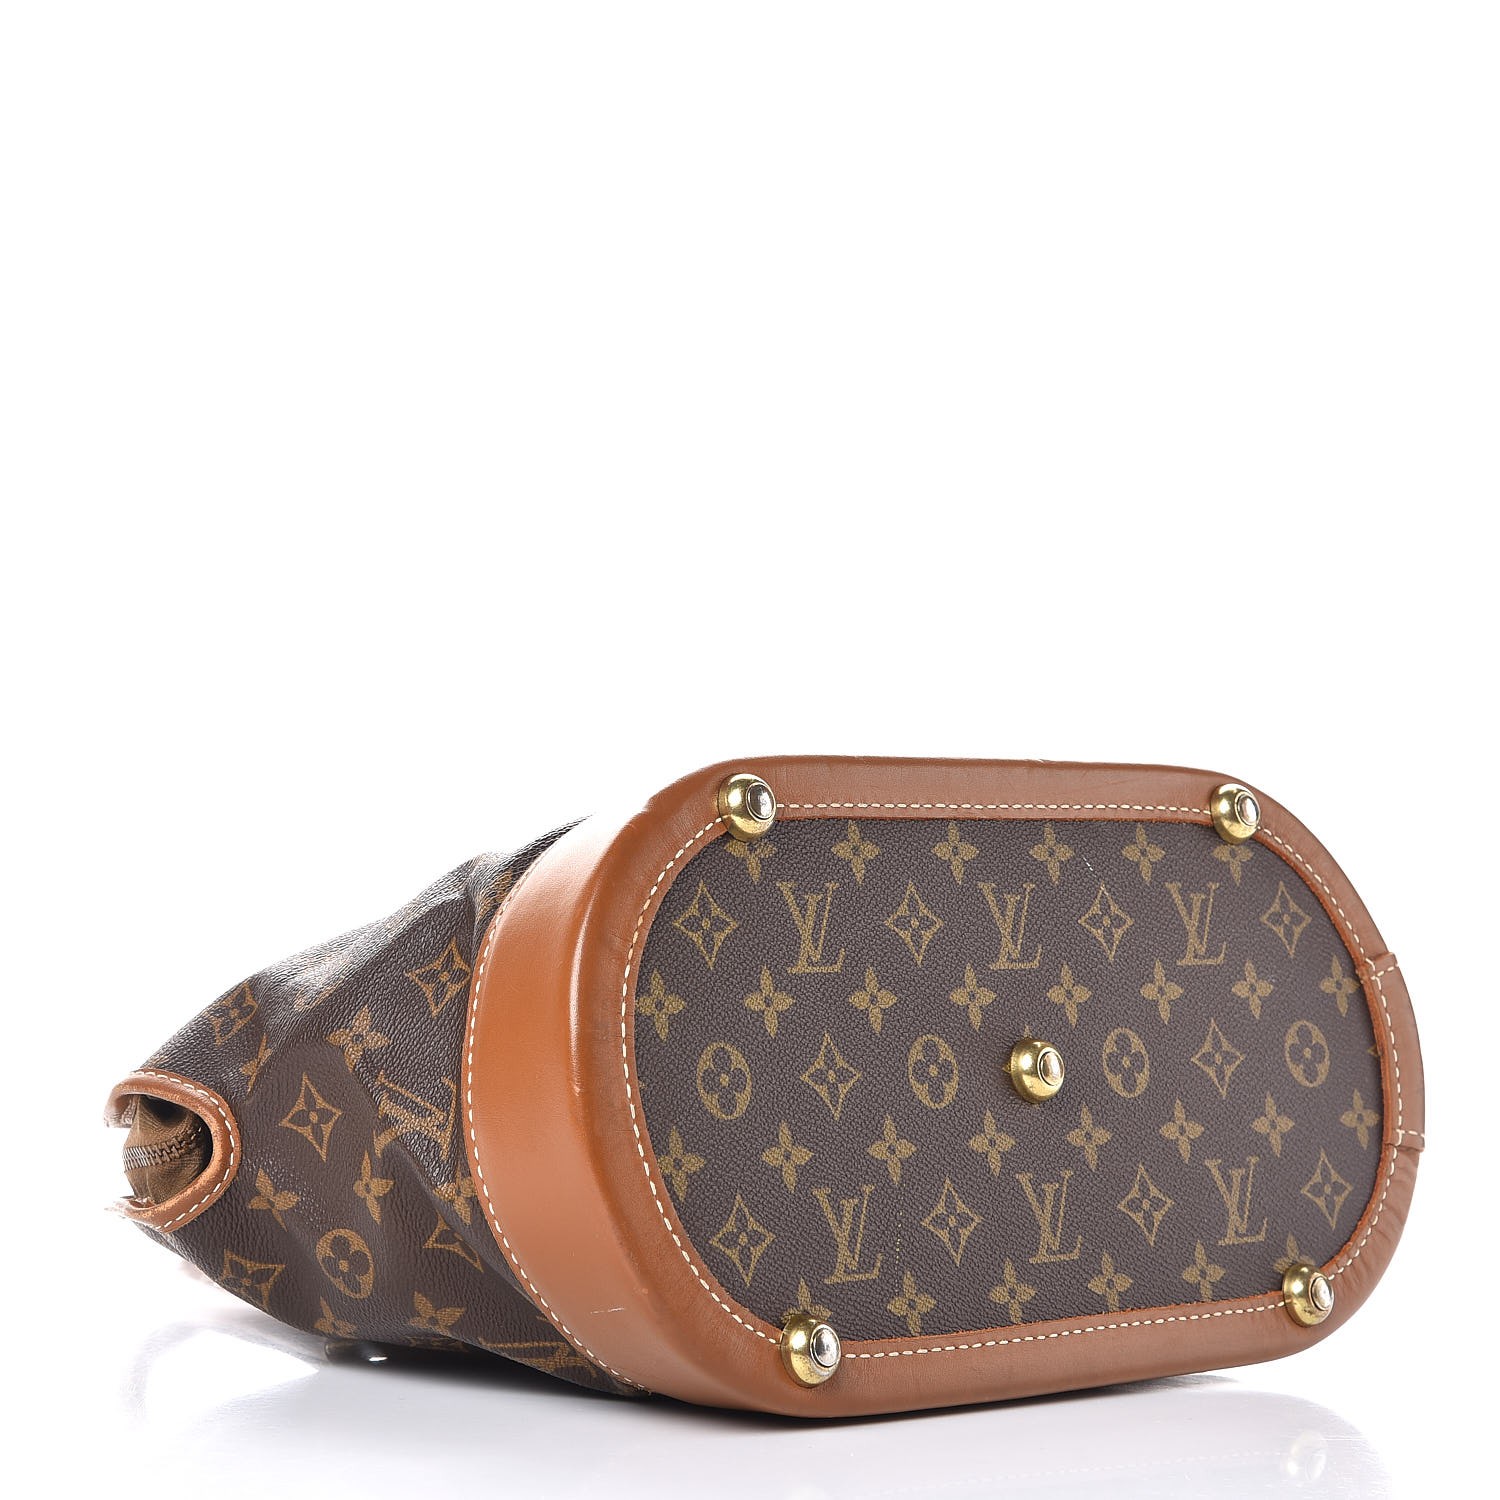 LOUIS VUITTON French Company Sac Chien Dog Pet Carrier 293466